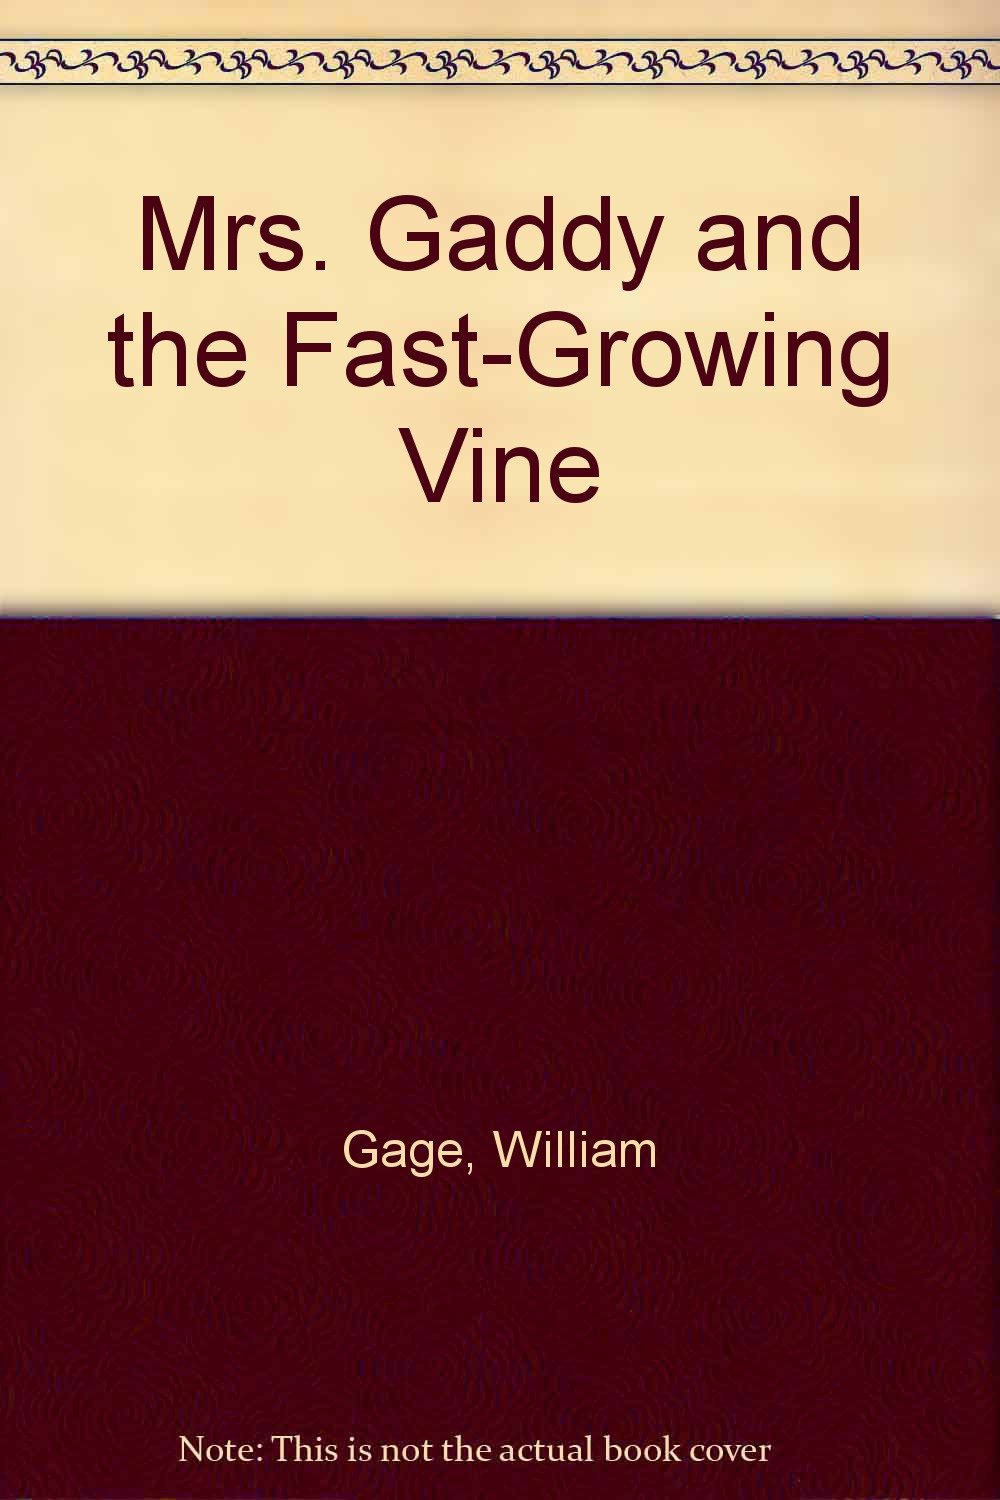 Mrs. Gaddy and the fast-growing vine magazine reviews